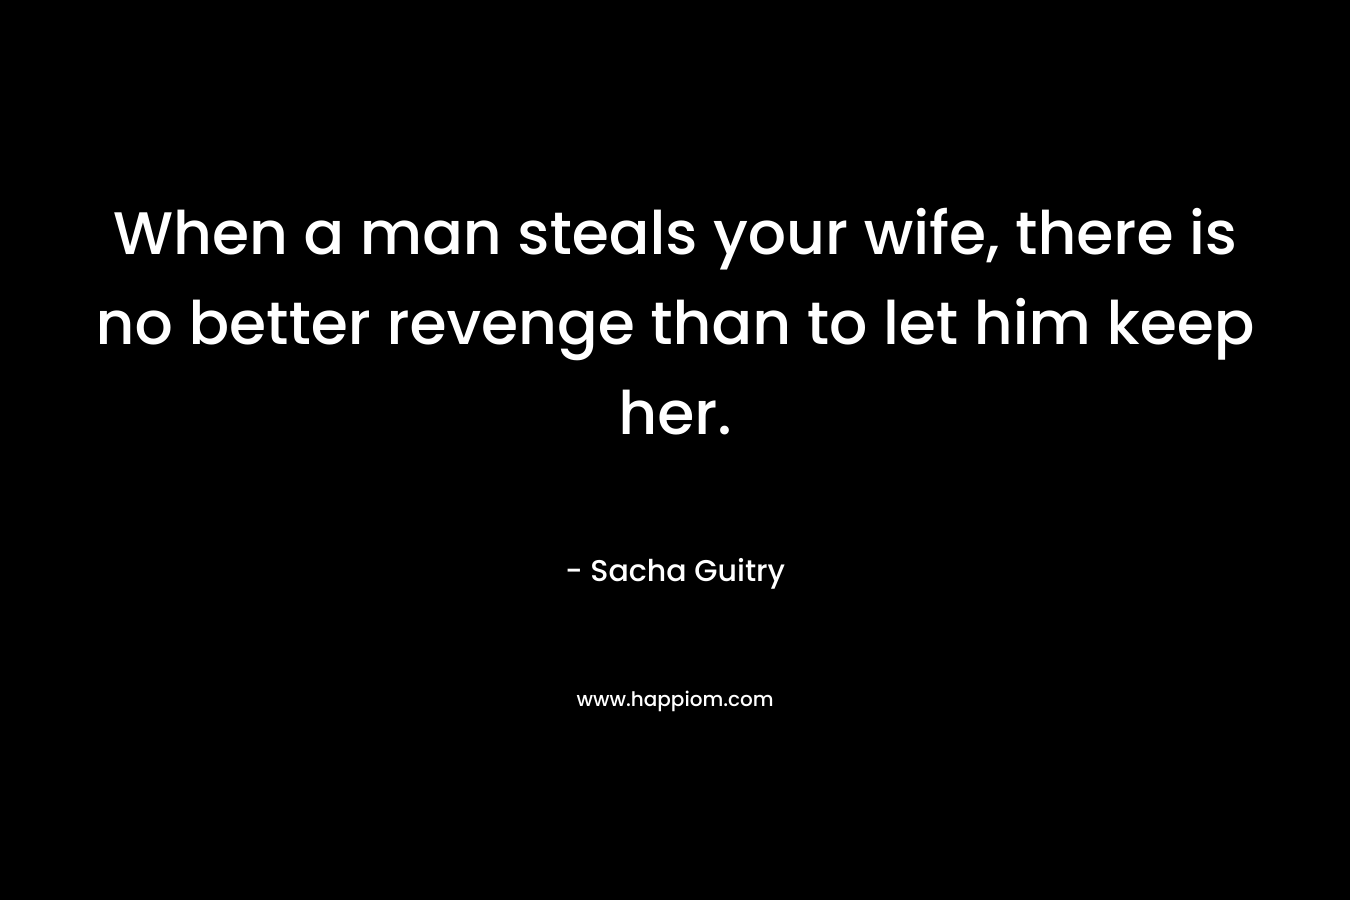 When a man steals your wife, there is no better revenge than to let him keep her. – Sacha Guitry